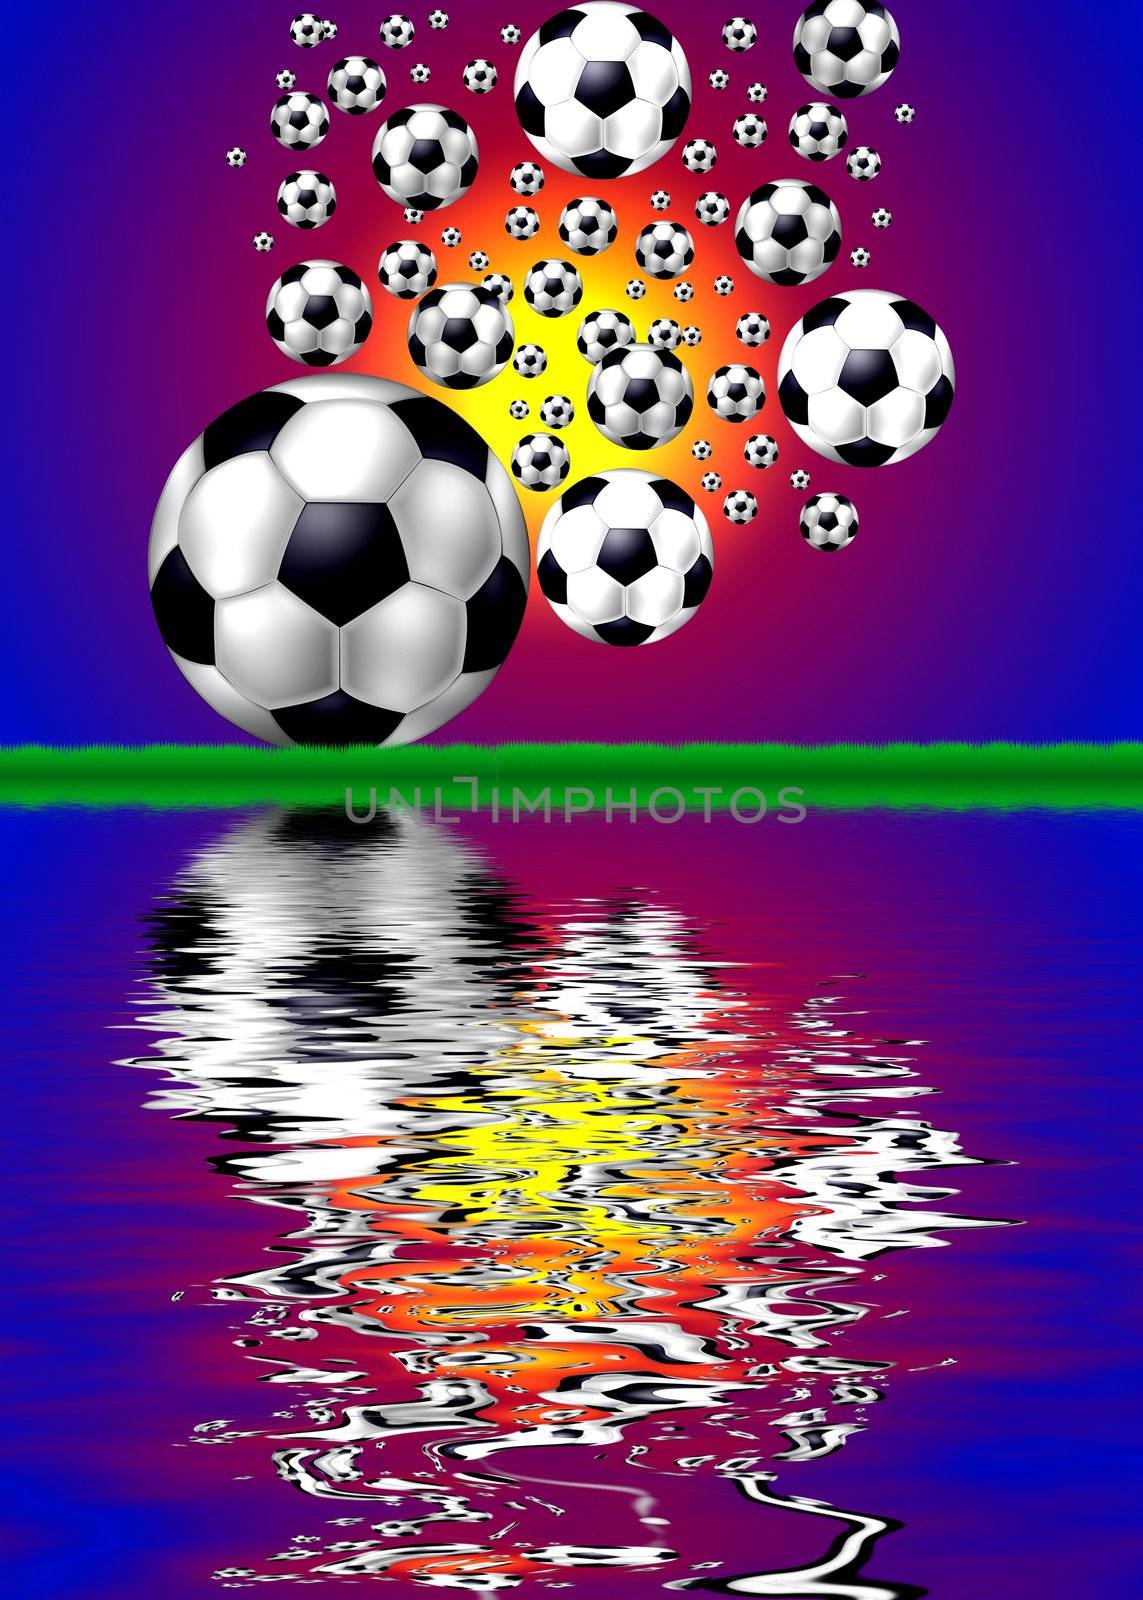 soccerballs mirrored in water